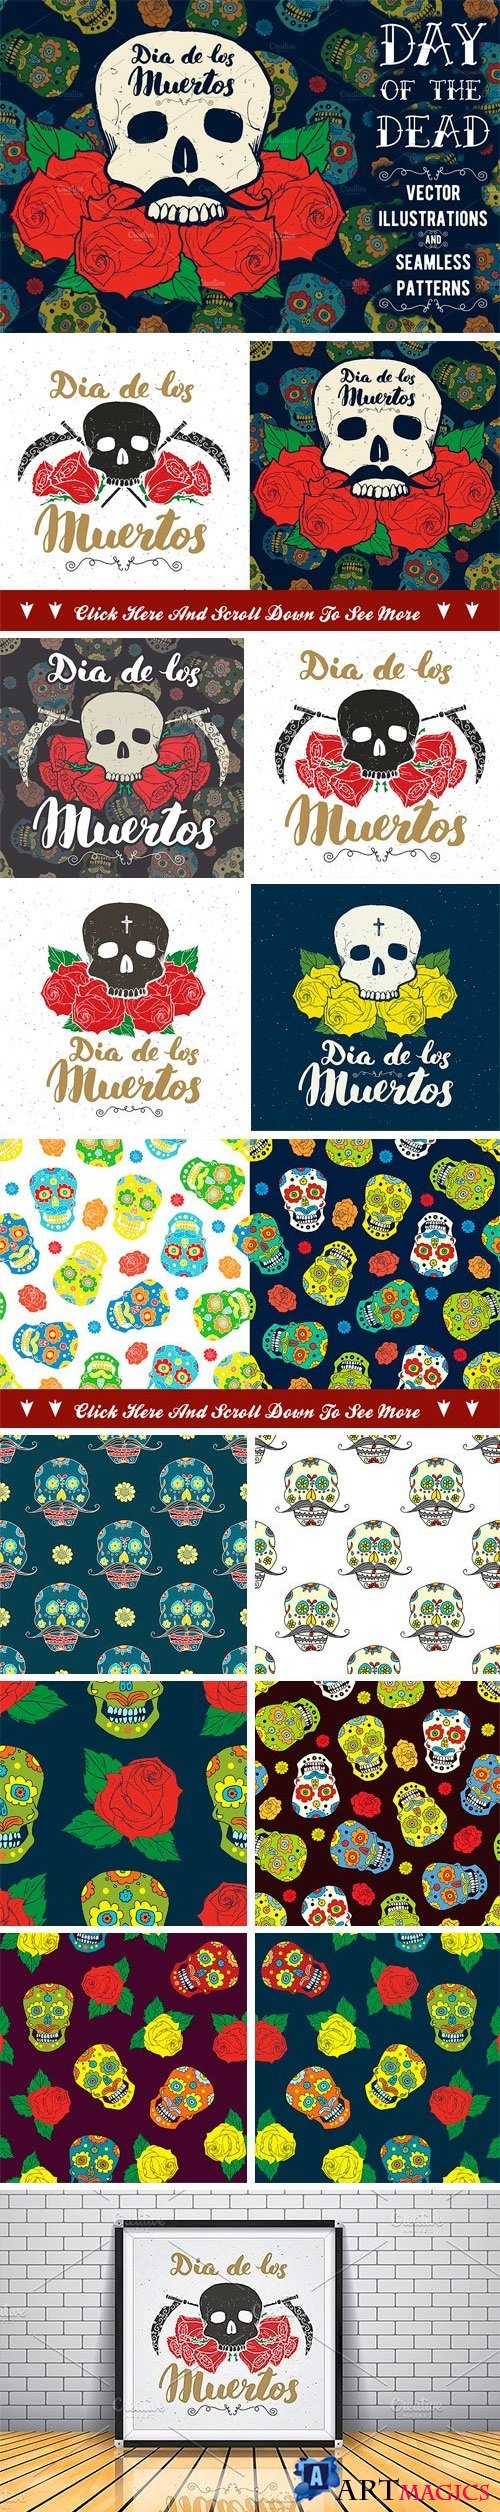 Day of the Dead, Cards and Patterns 1939019